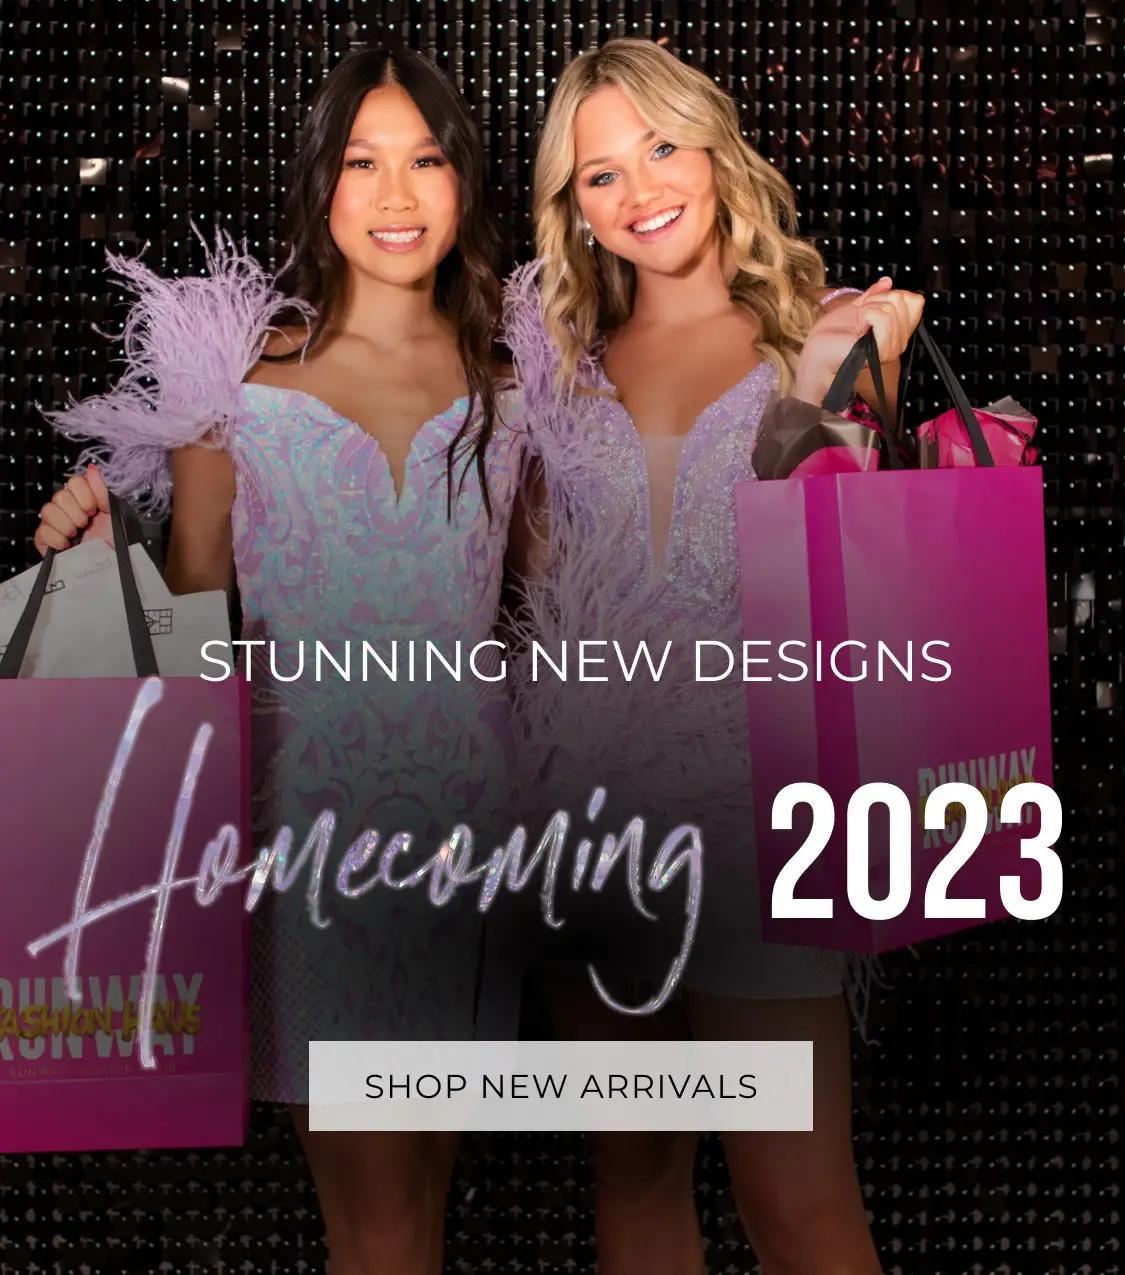 Homecoming 2023 collection Banner for Mobile